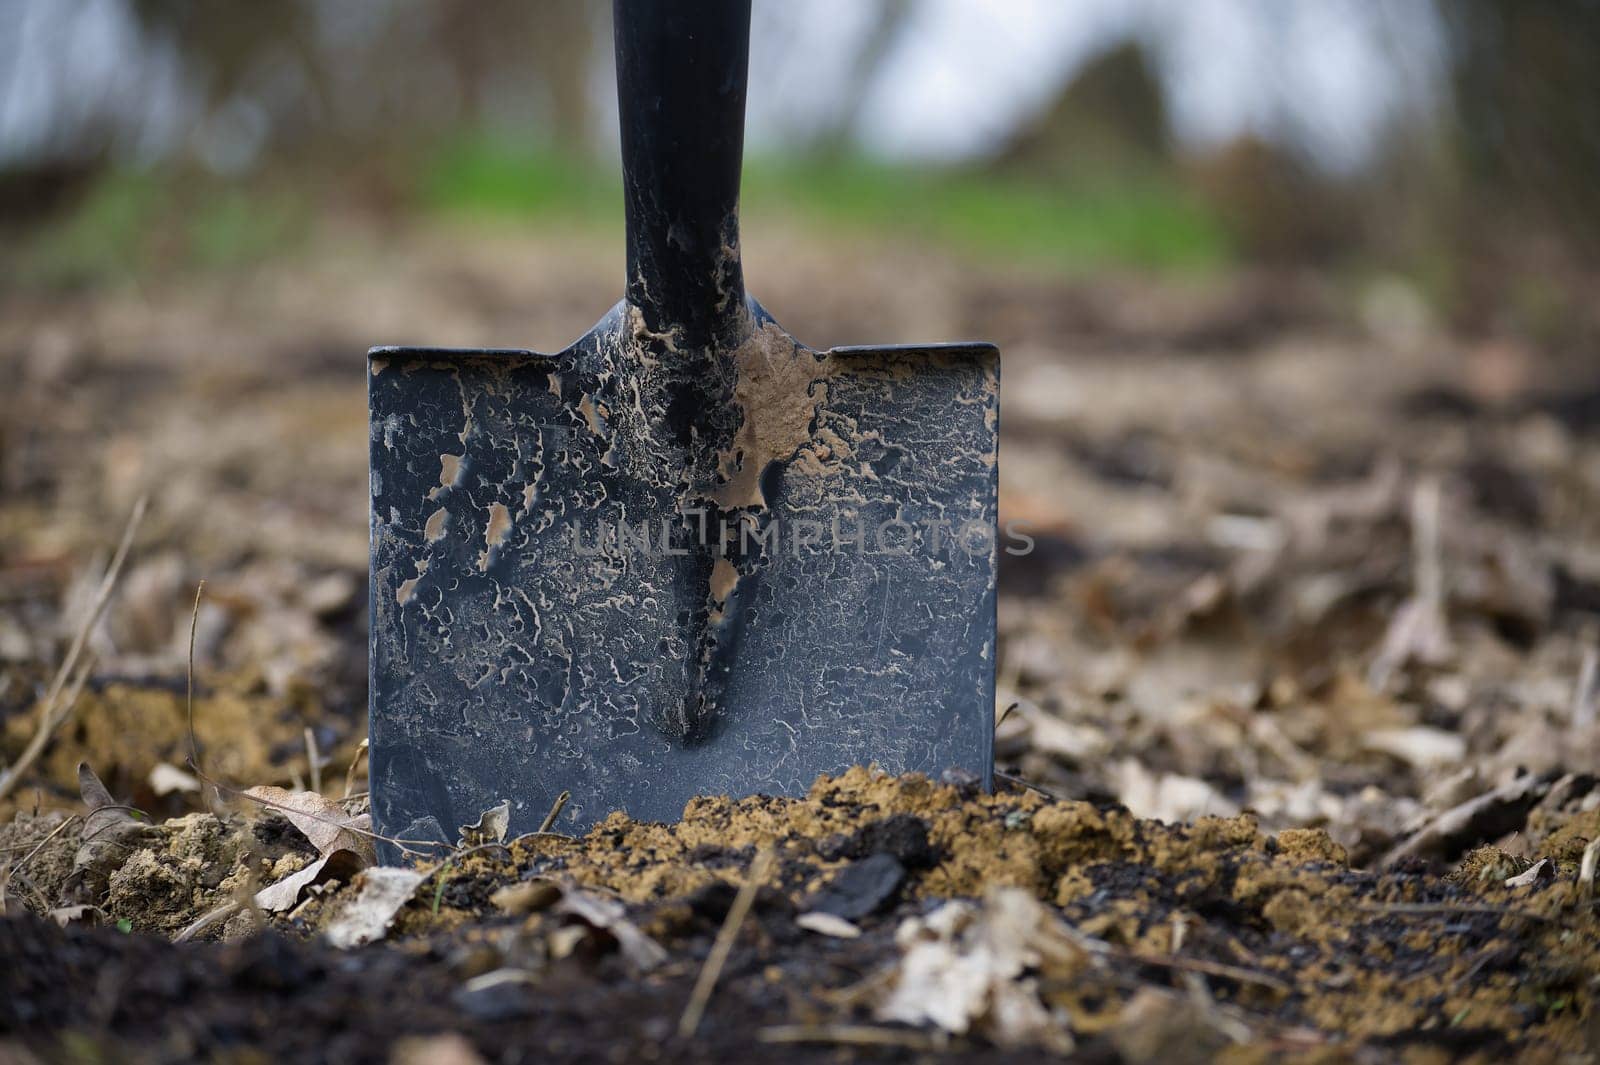 Close up of a shovel with a black handle stuck in the ground, with dirt and mud on the blade, surrounding ground covered with mud and fallen leaves